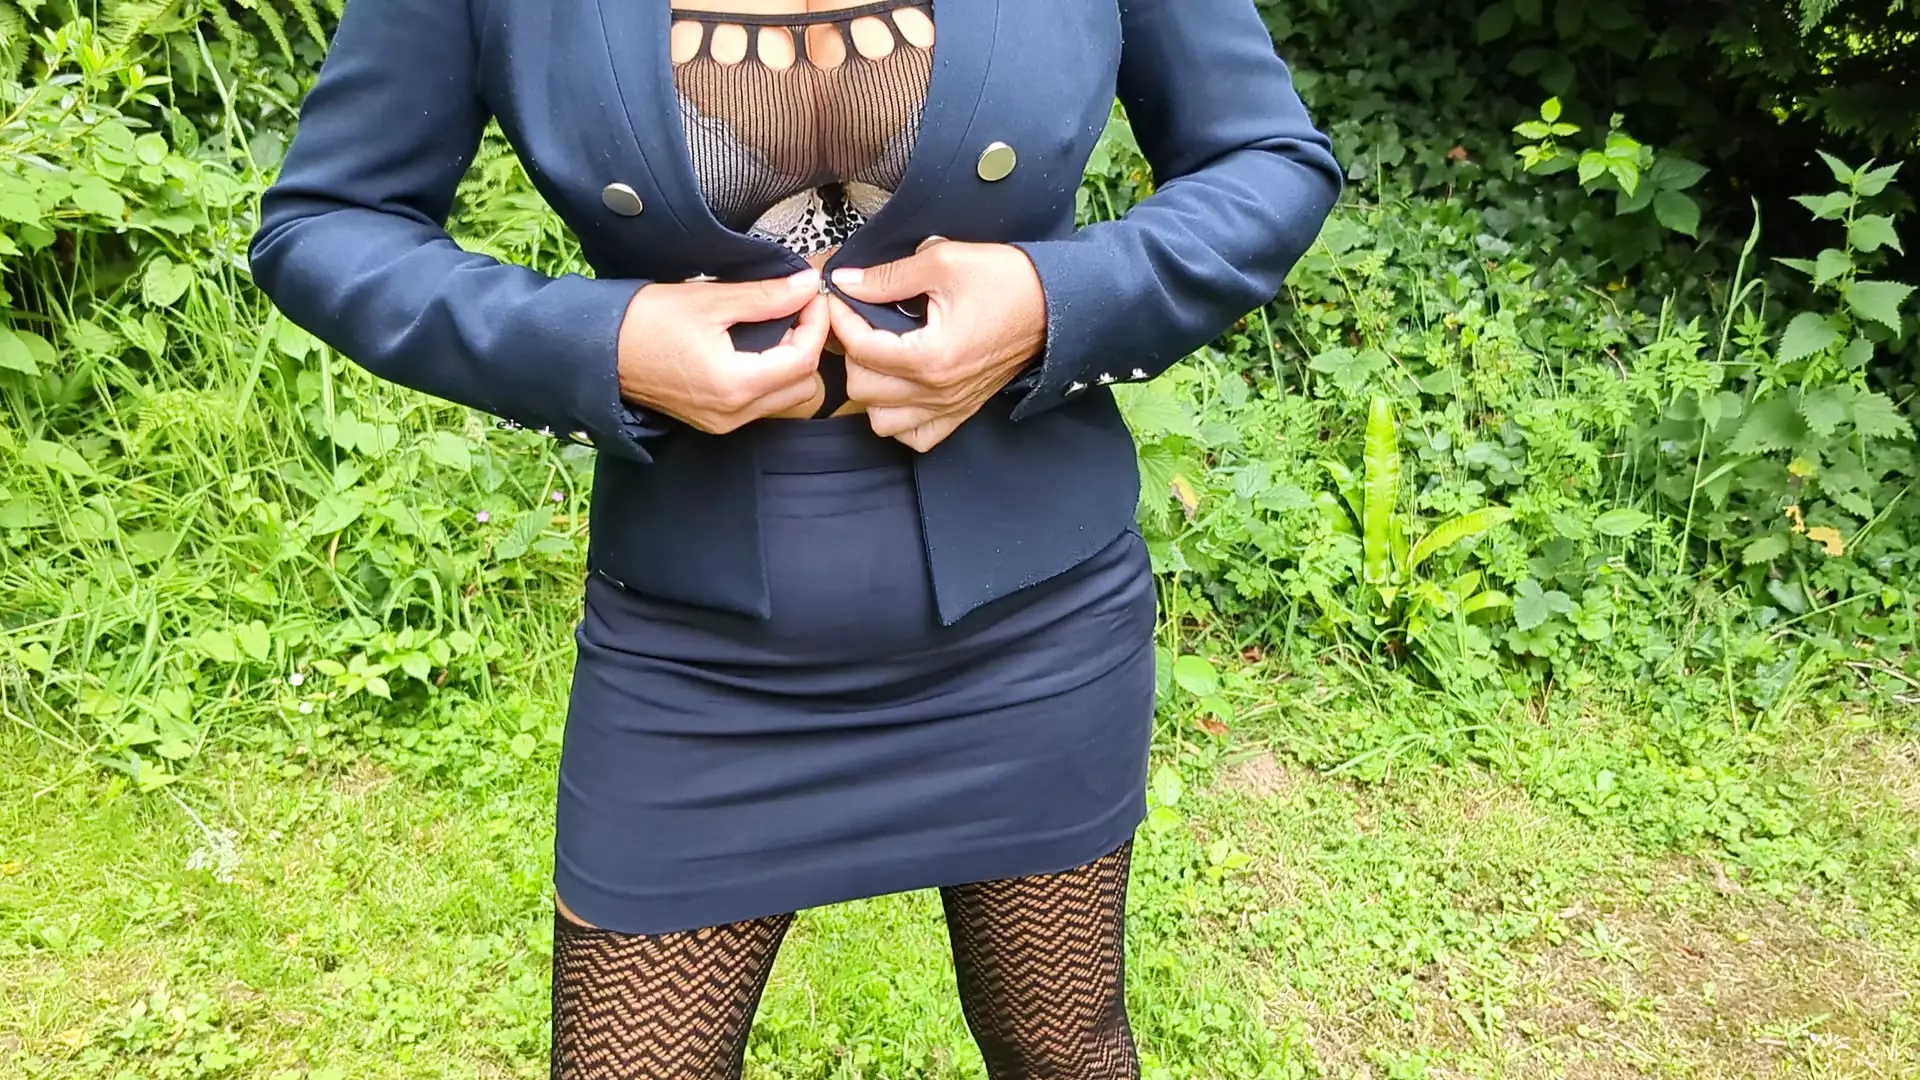 Hot french milf wife with big natural tits stripping outdoors on her lunch break hq image